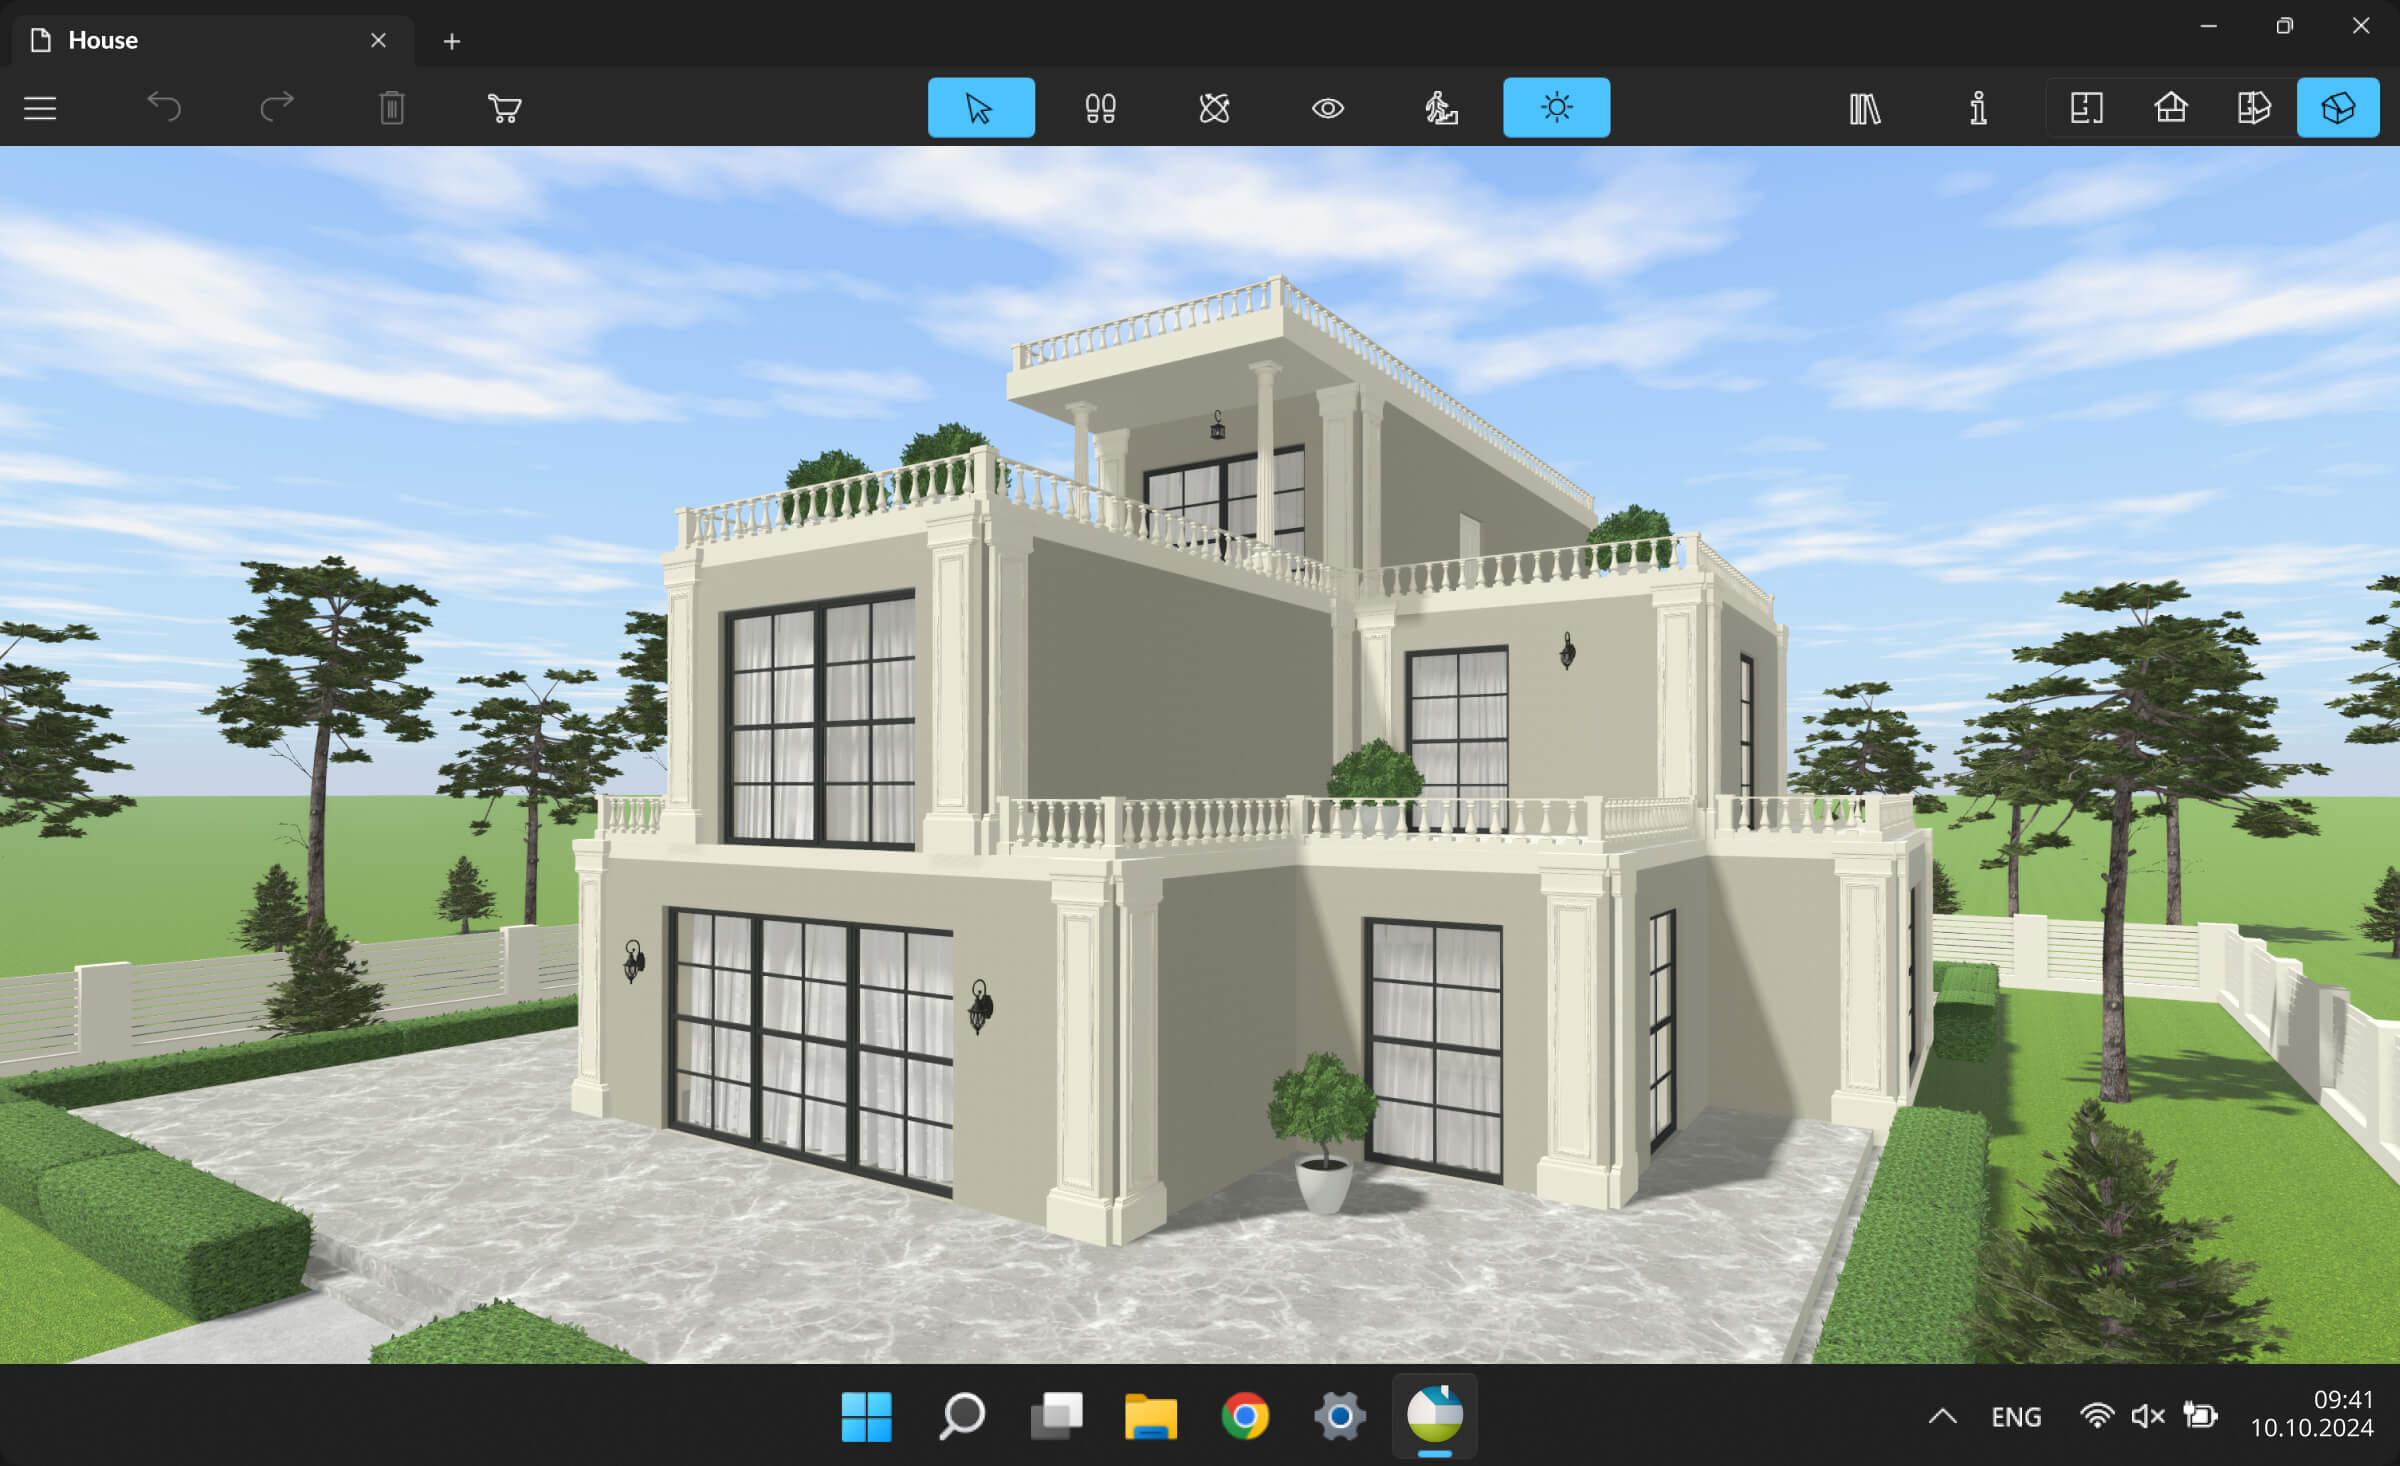 A house designed in the Live Home 3D App for Windows.